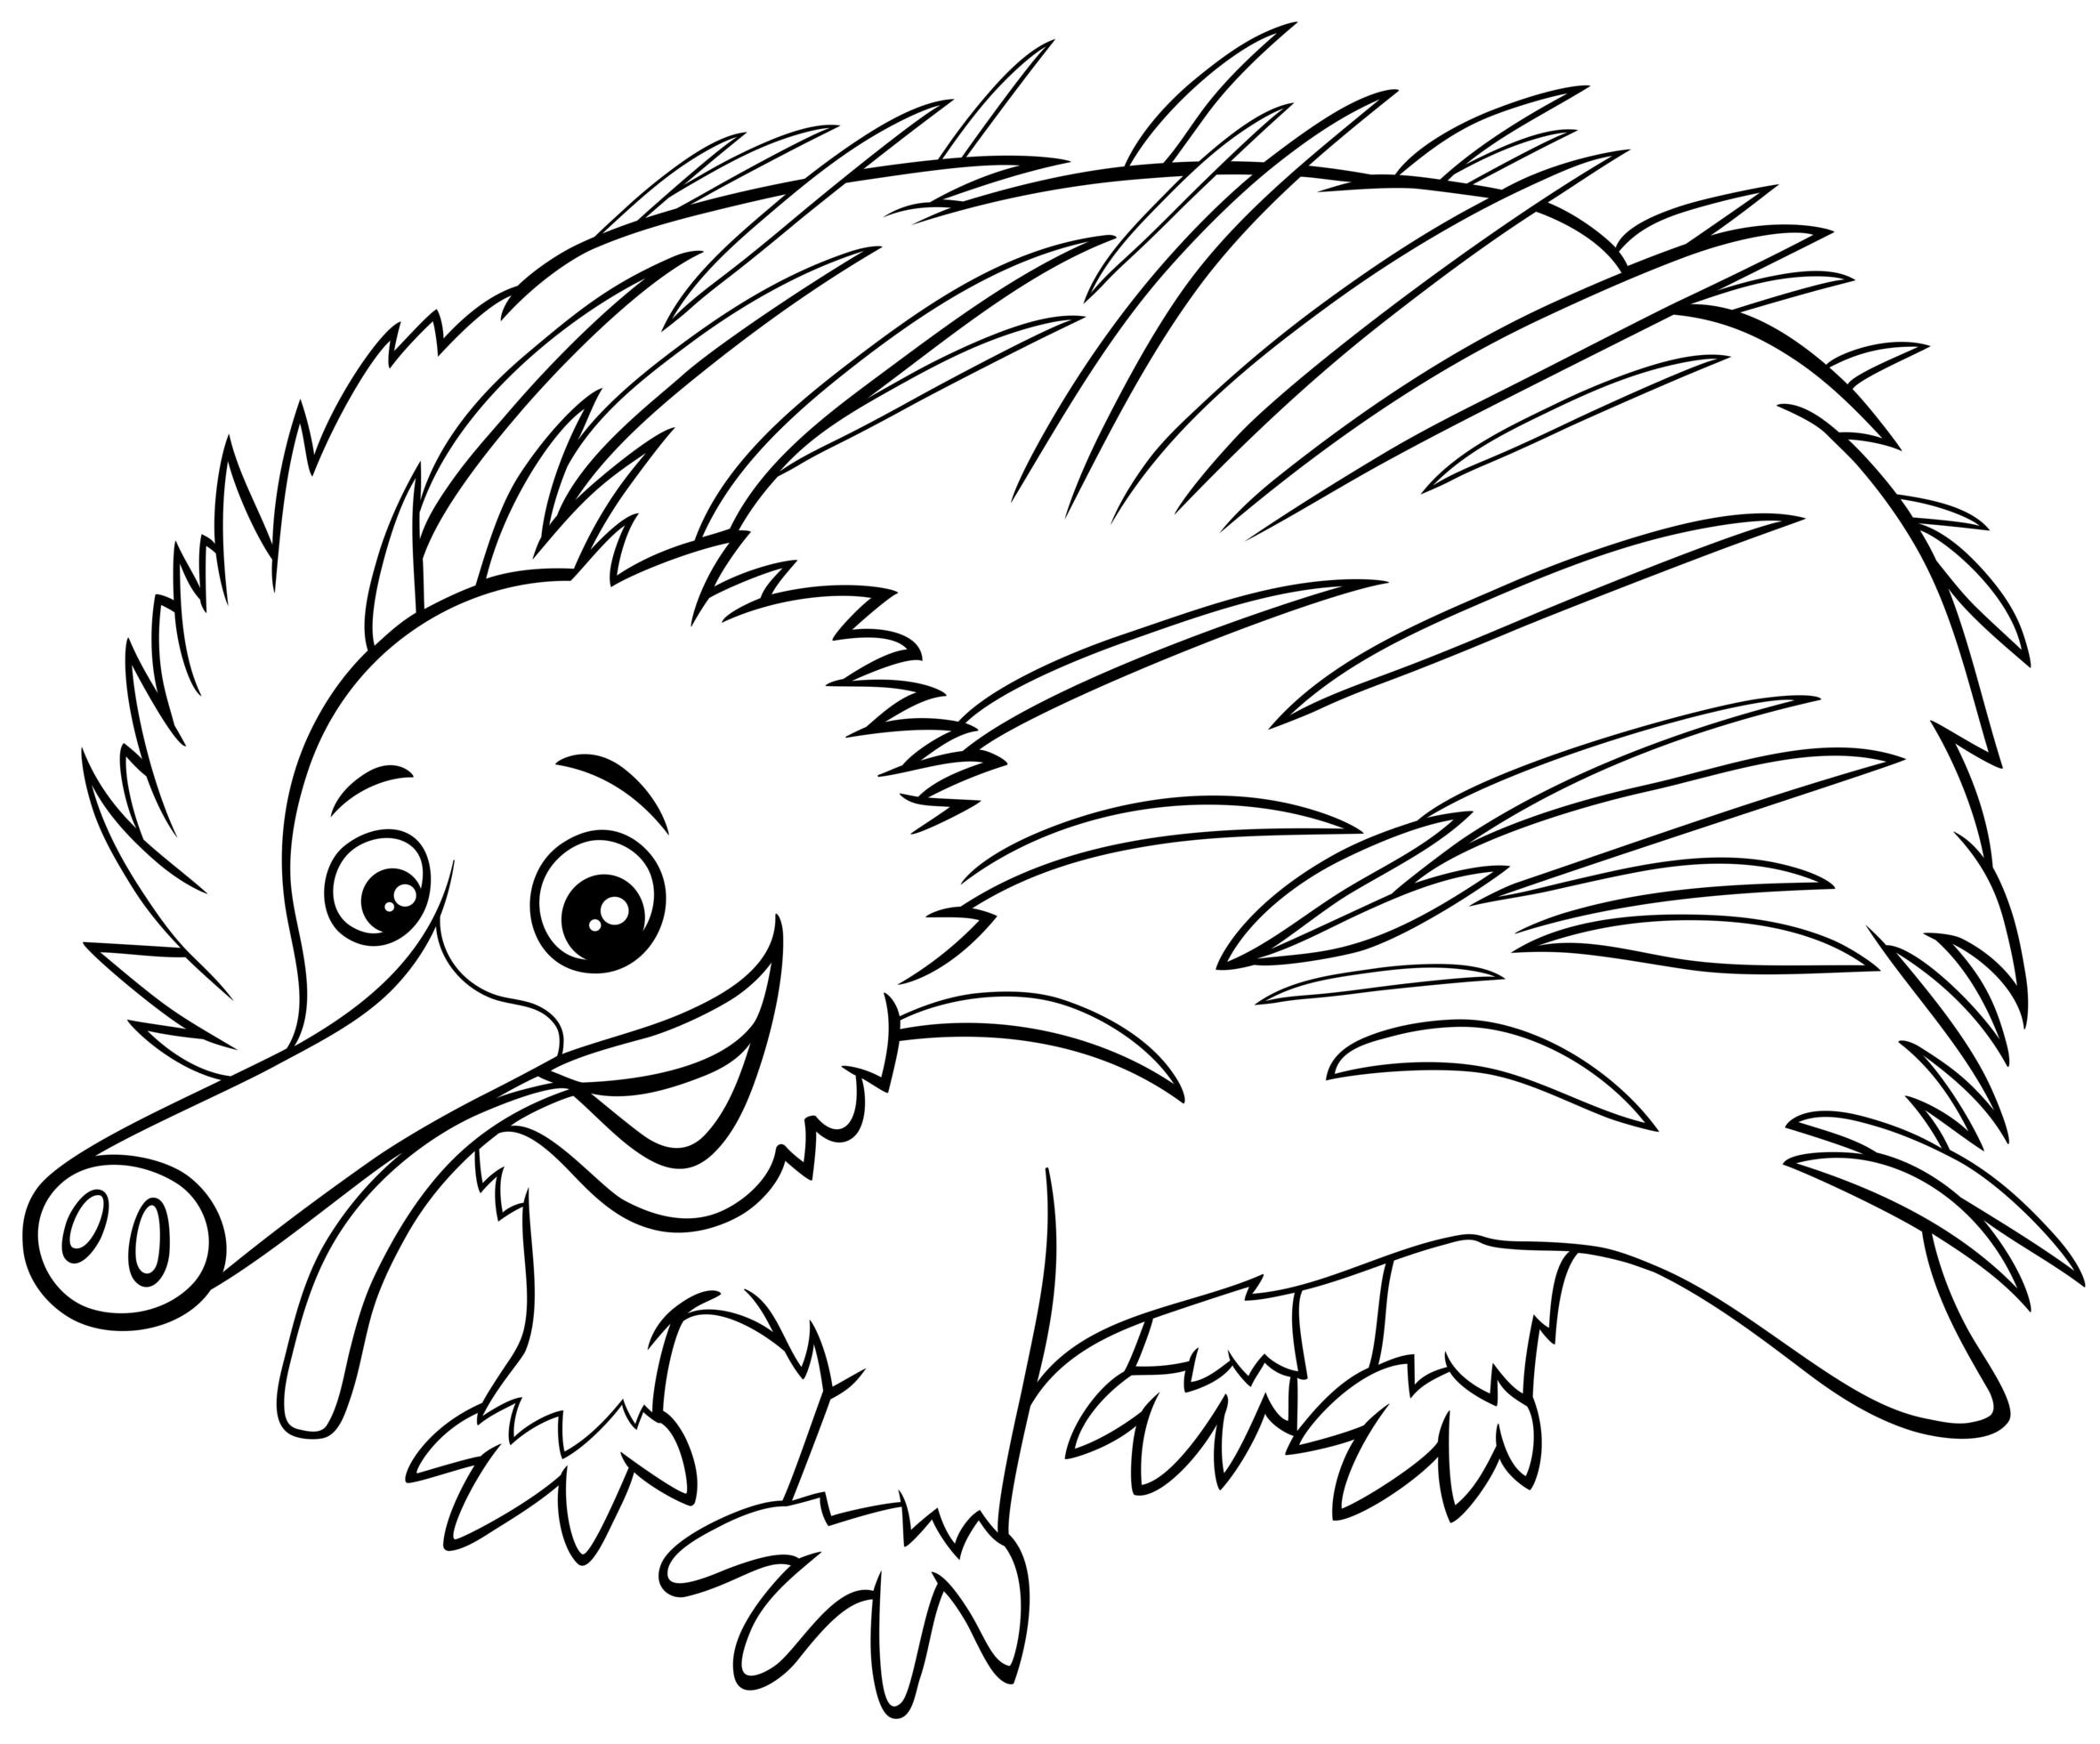 Echidna Coloring Pages Template Mythology Hedgehog Sketch Coloring Page